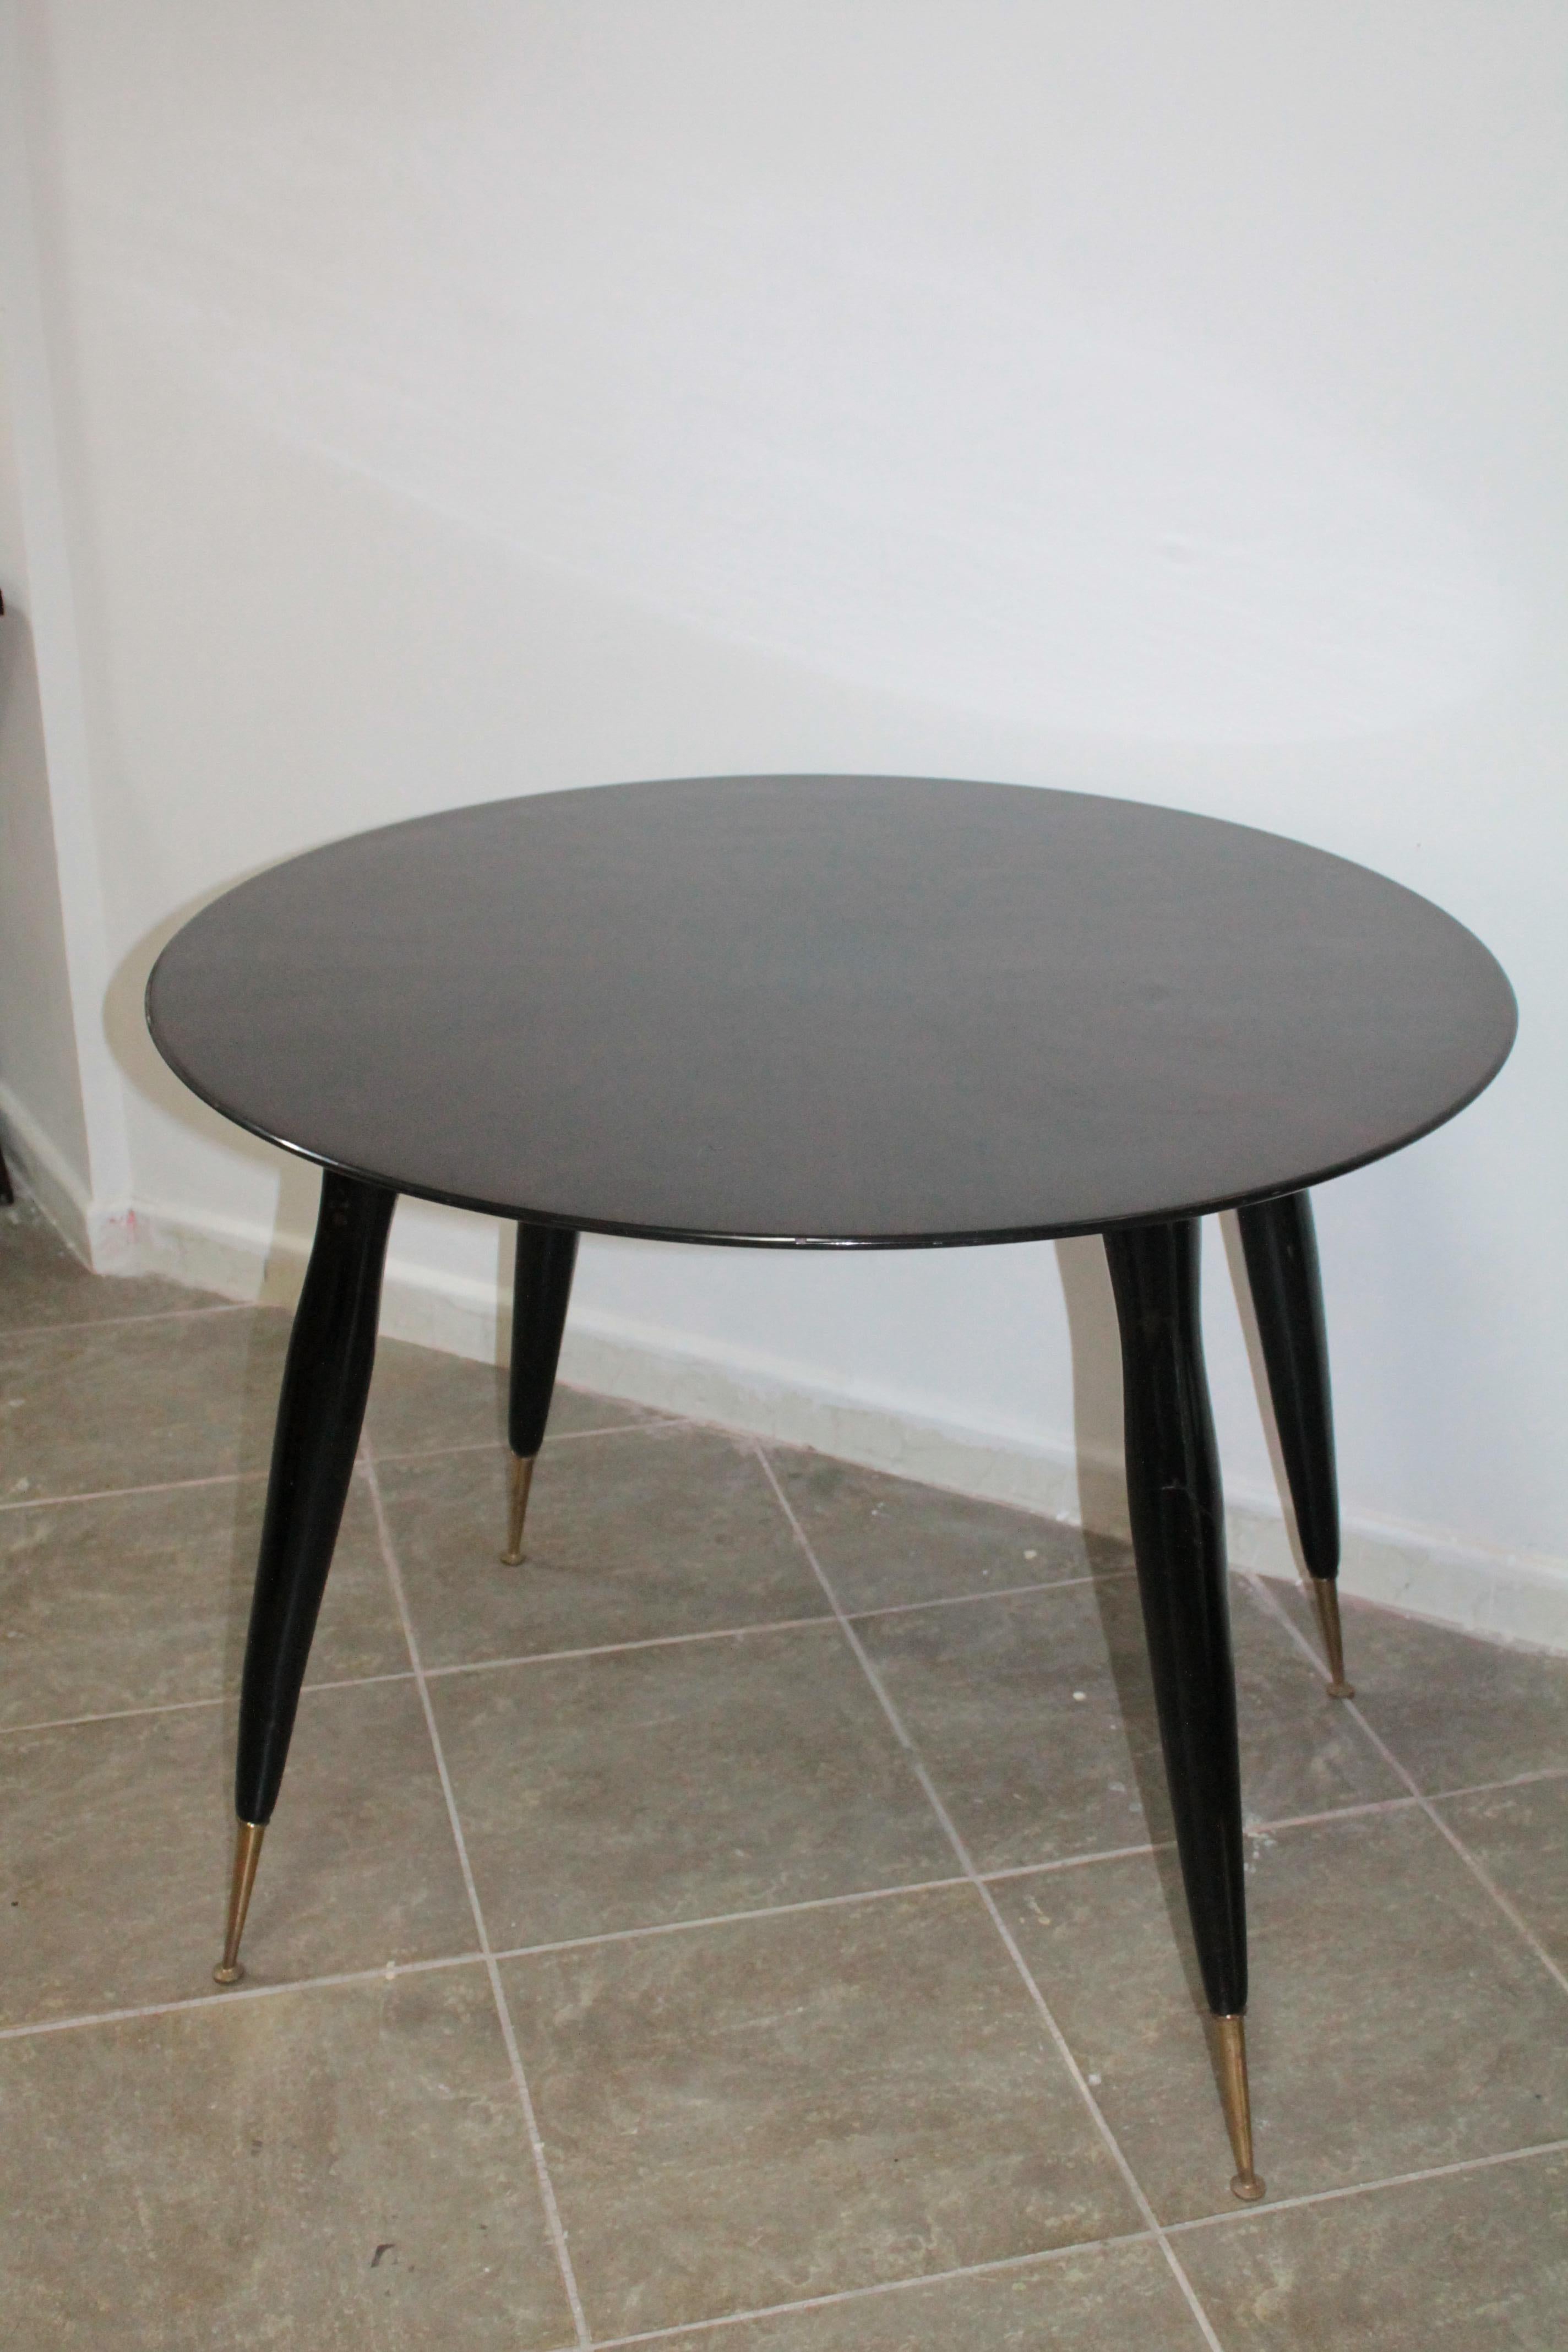 Italian Round Dining Table Rosewood in the Style of Gio Ponti, 1950s For Sale 5